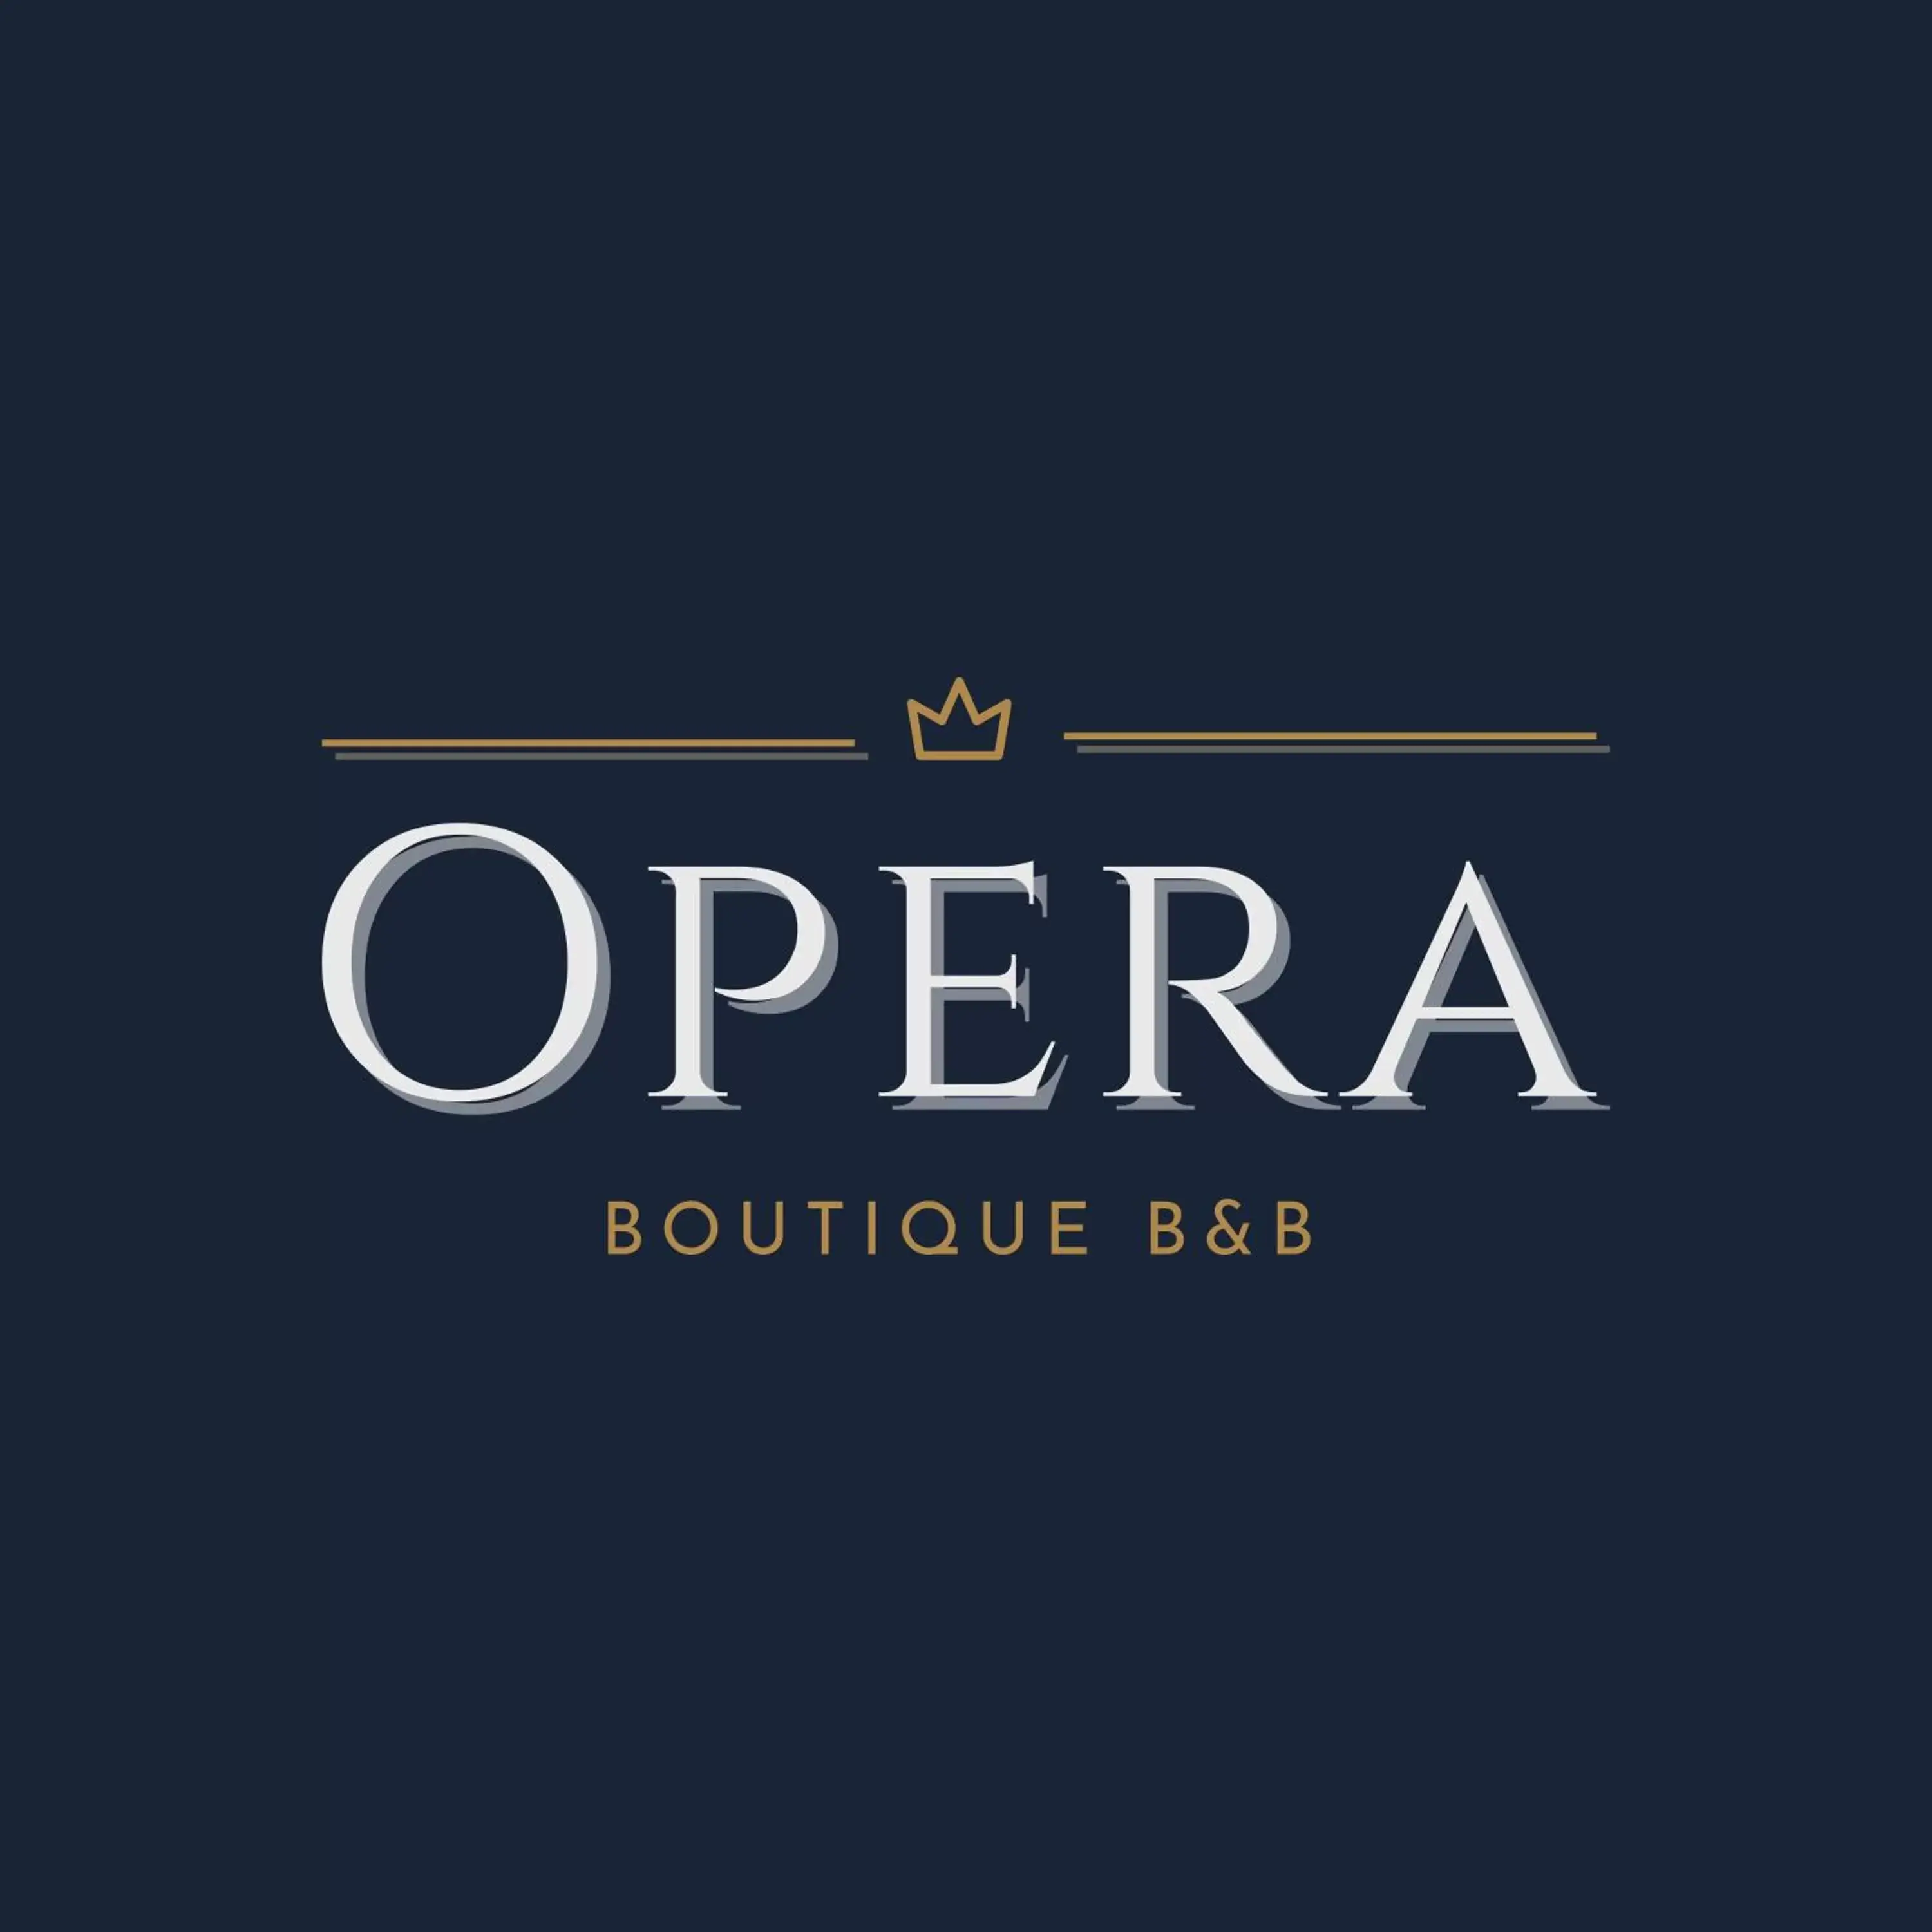 Property logo or sign in Opera Boutique B&B